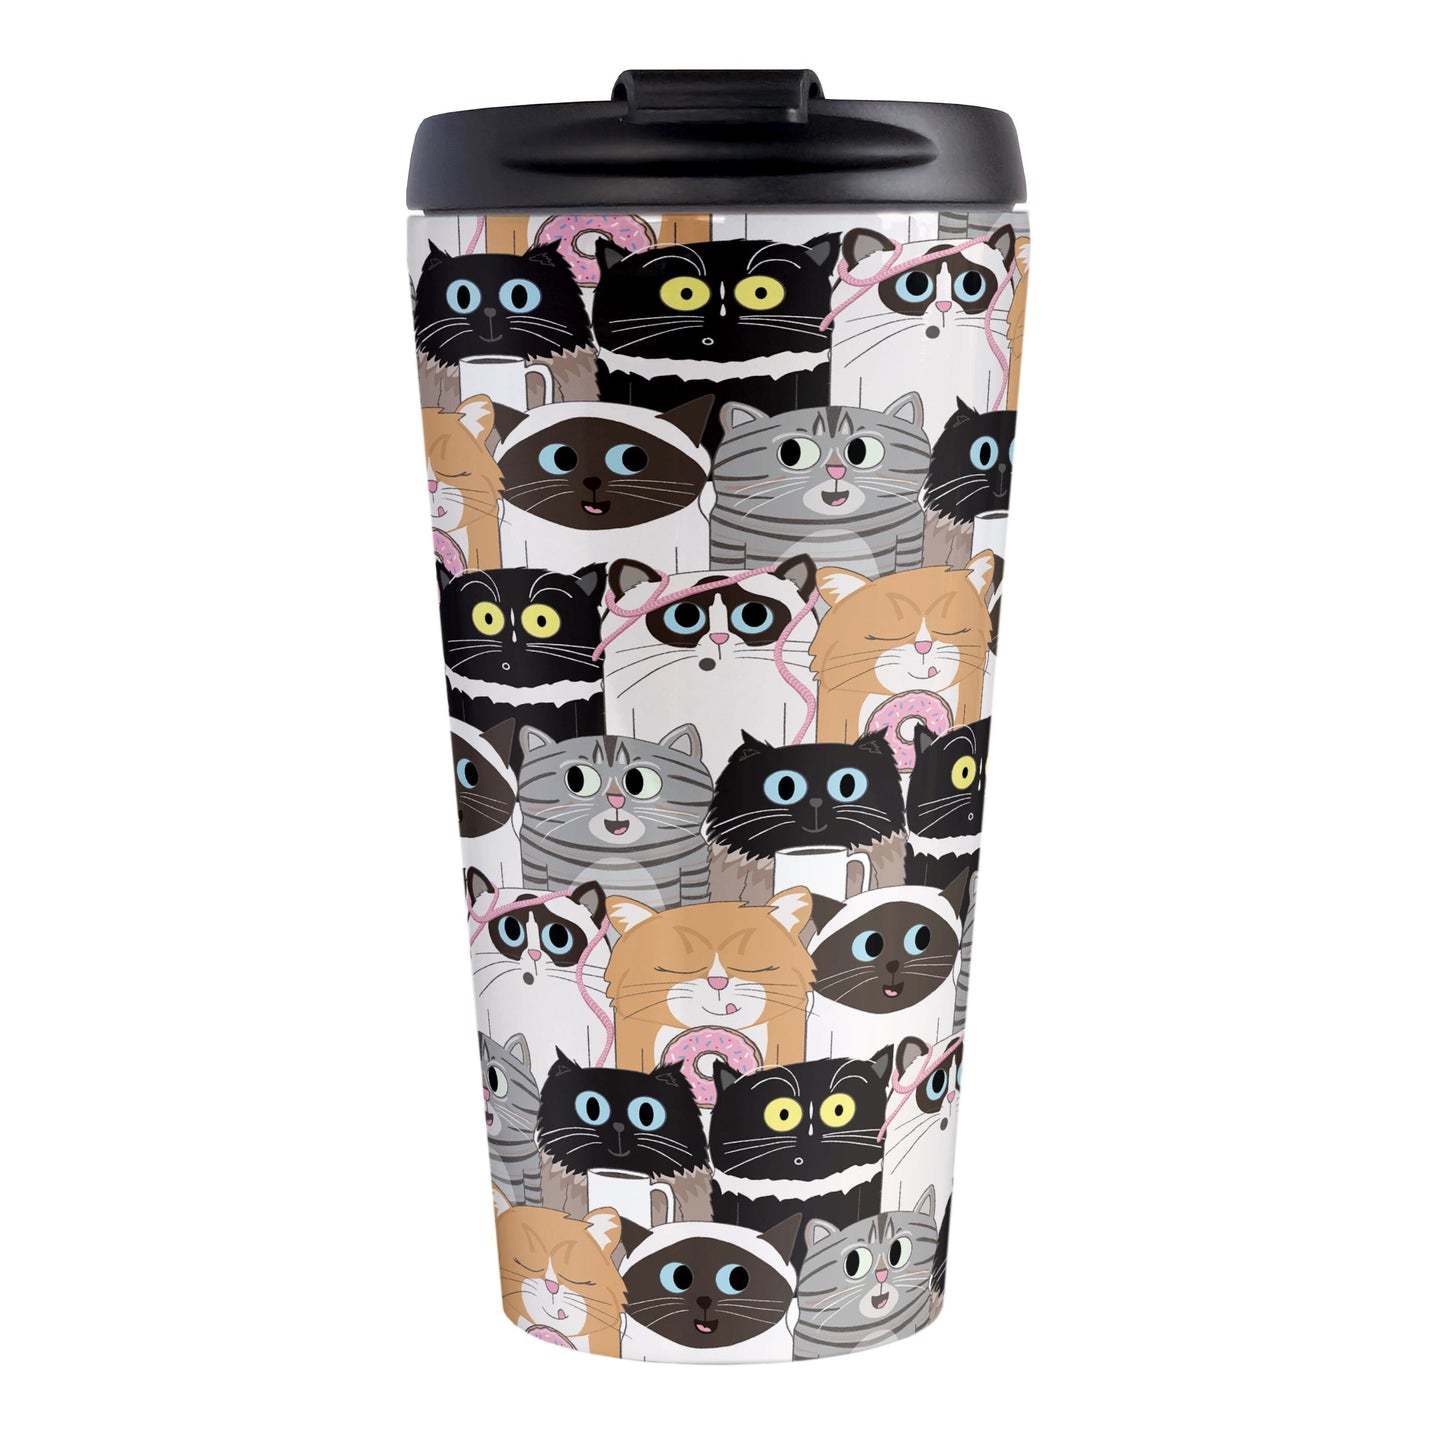 Cute Cat Stack Pattern Travel Mug (15oz) at Amy's Coffee Mugs. A cute stainless steel travel mug with an illustrated pattern of different breeds of cats with different fun expressions, with yarn, coffee, and donuts. This stacked pattern of cats wraps around the cup.